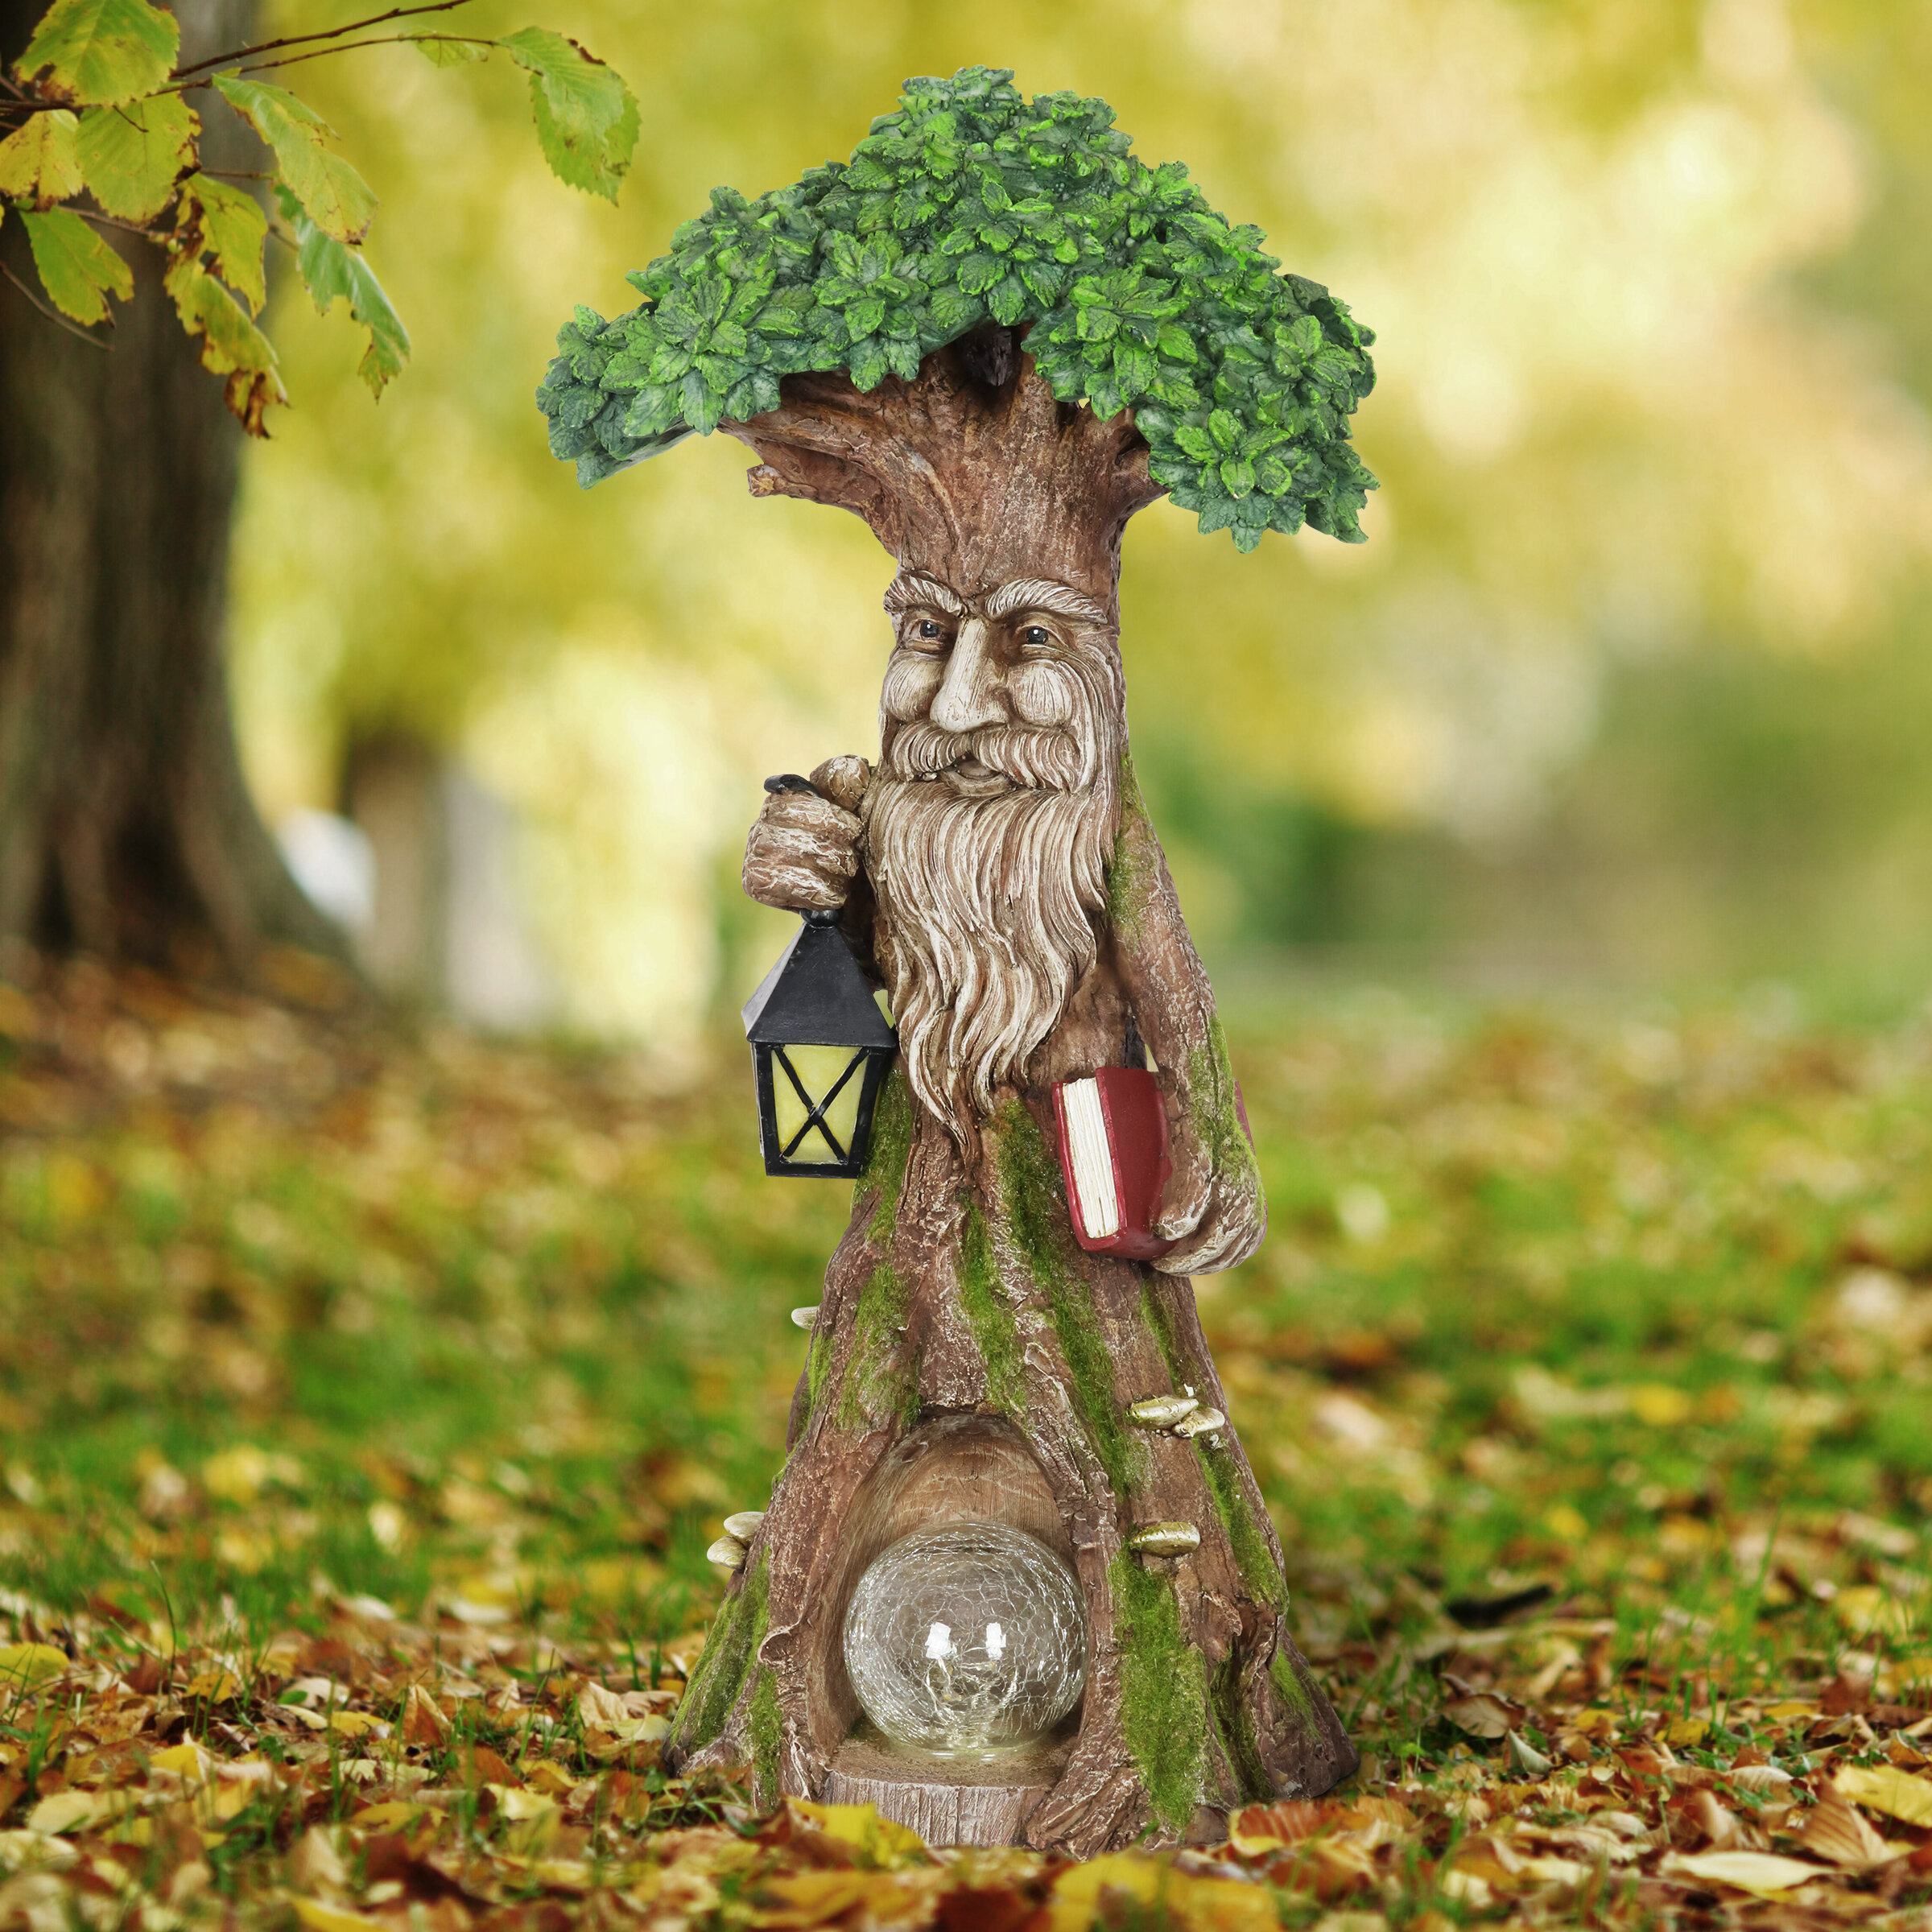 FAIRY GARDEN New Decor Tree With Face on Trunk & Three Houses On Branches 